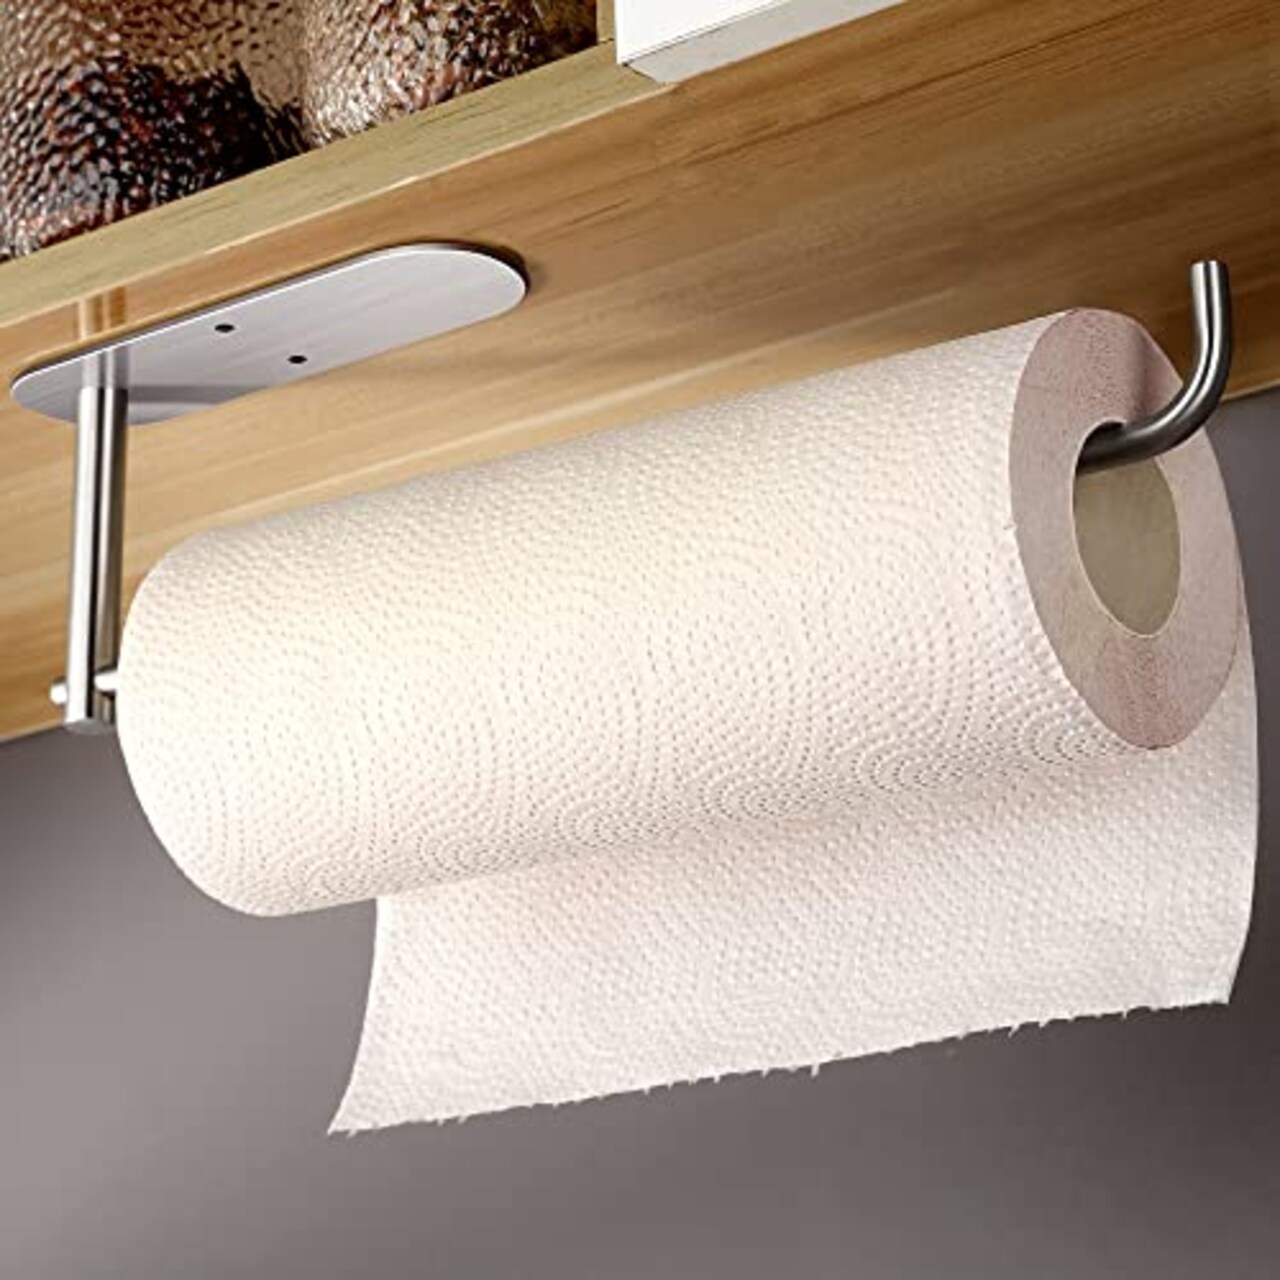 YIGII Paper Towel Holder Under Cabinet Mount - Self Adhesive Paper Towel  Rack or Wall Mounted for Kitchen, 12 Inch Bar - Fit All Roll Sizes,  Stainless Steel